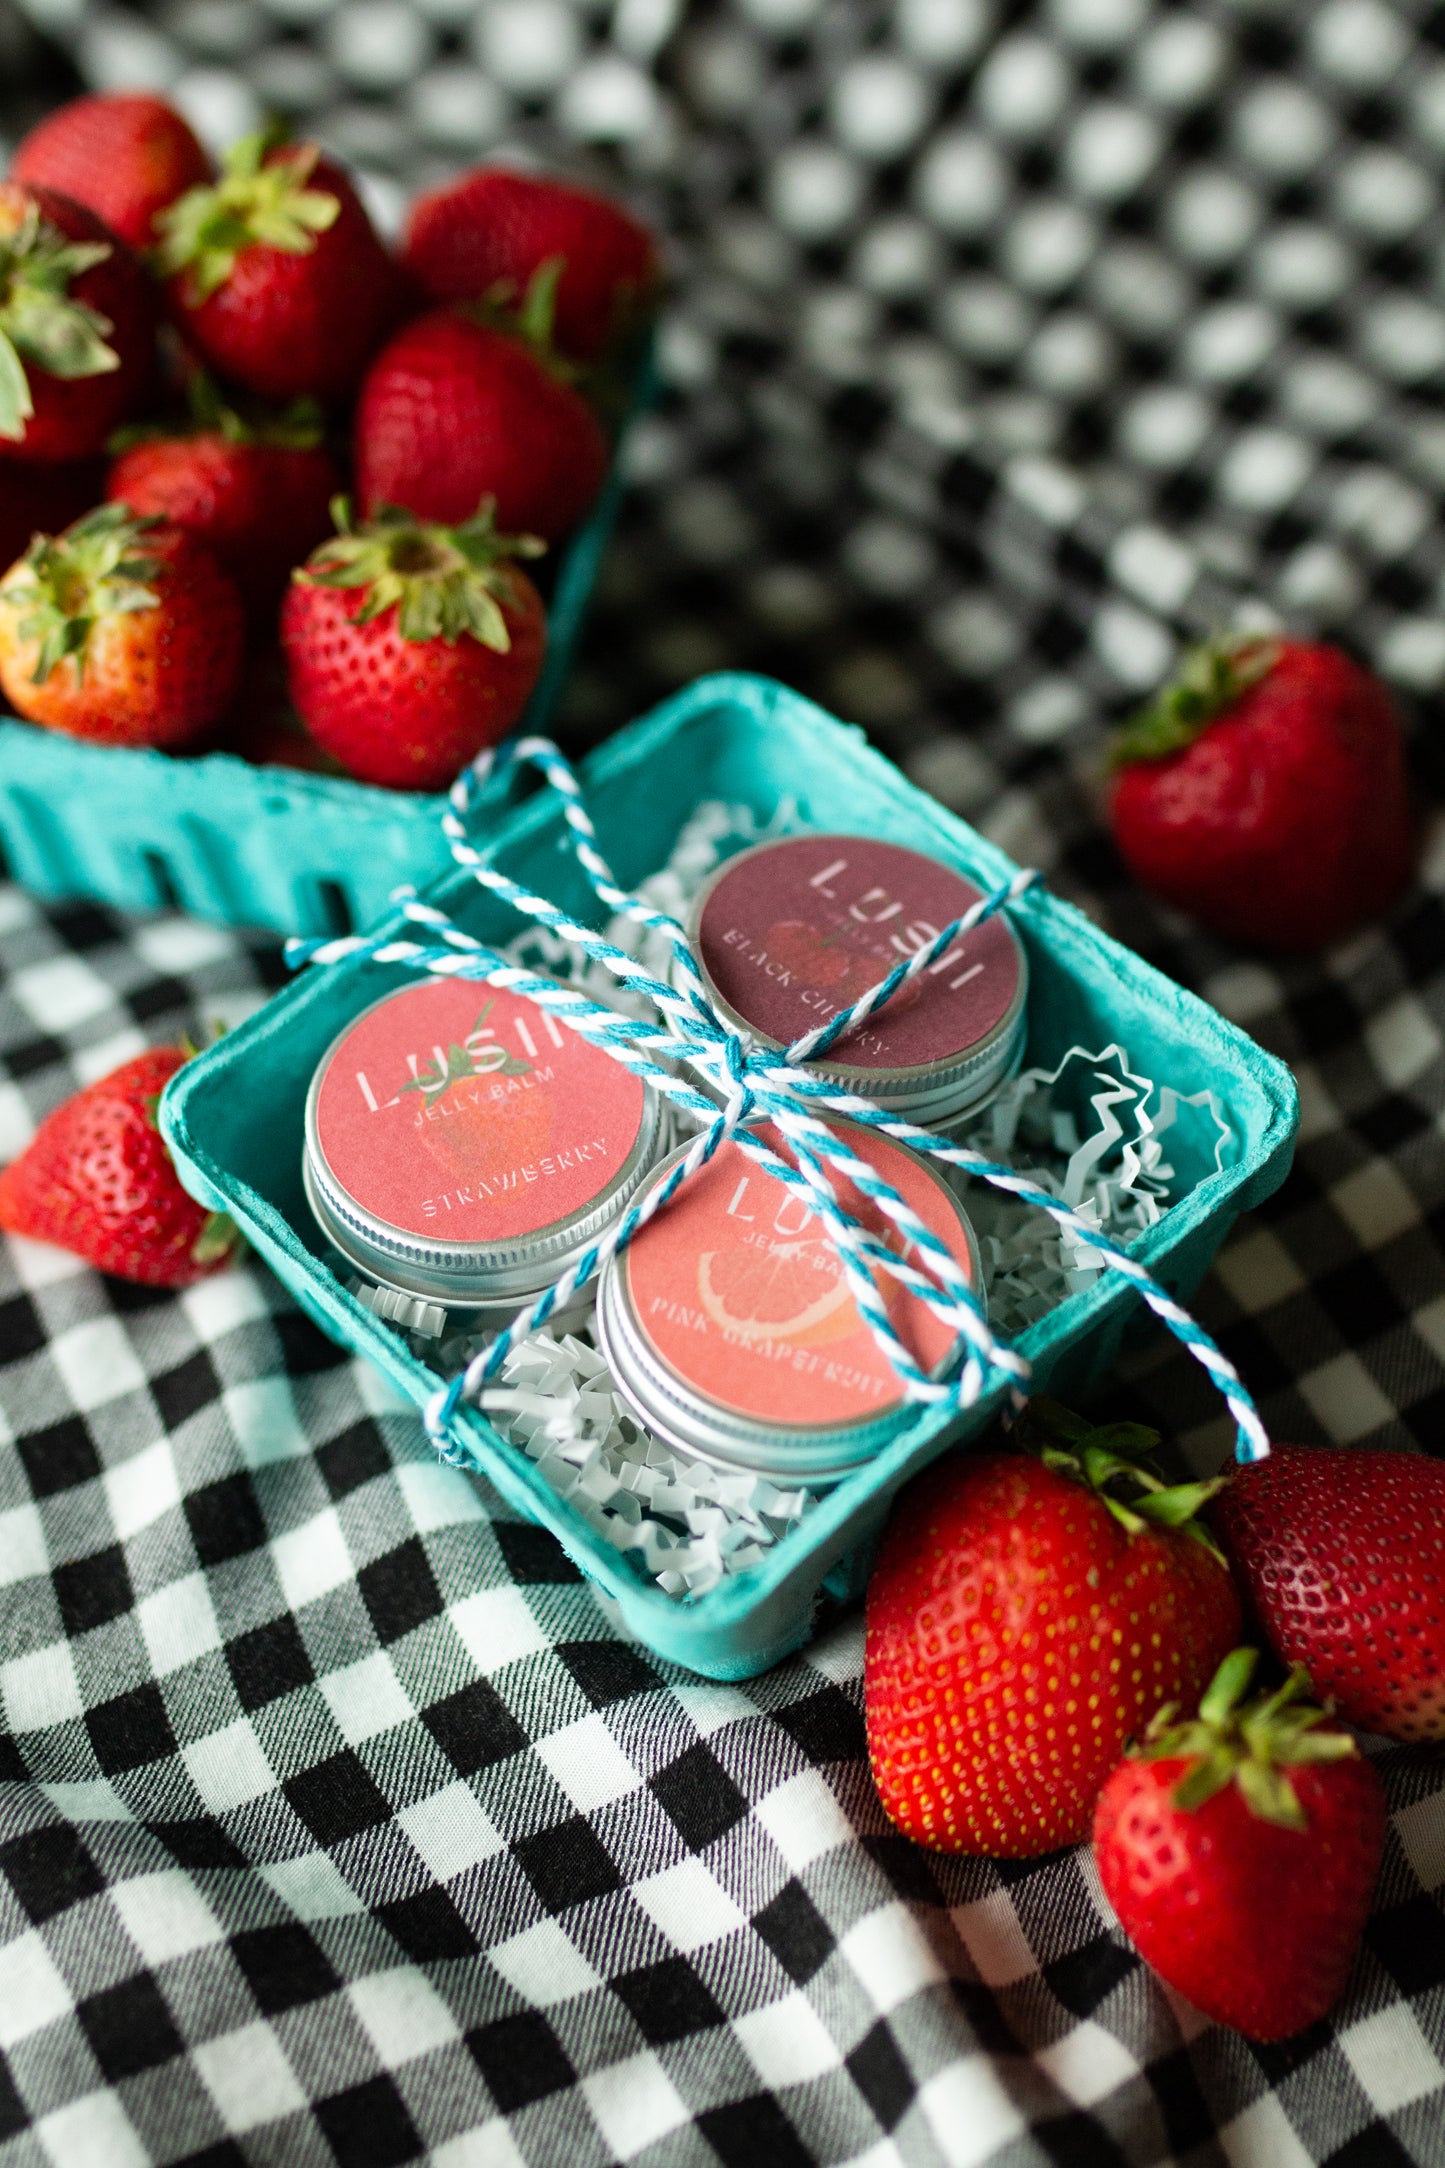 LIMITED EDITION • Summer Fruits Jelly Balm Set